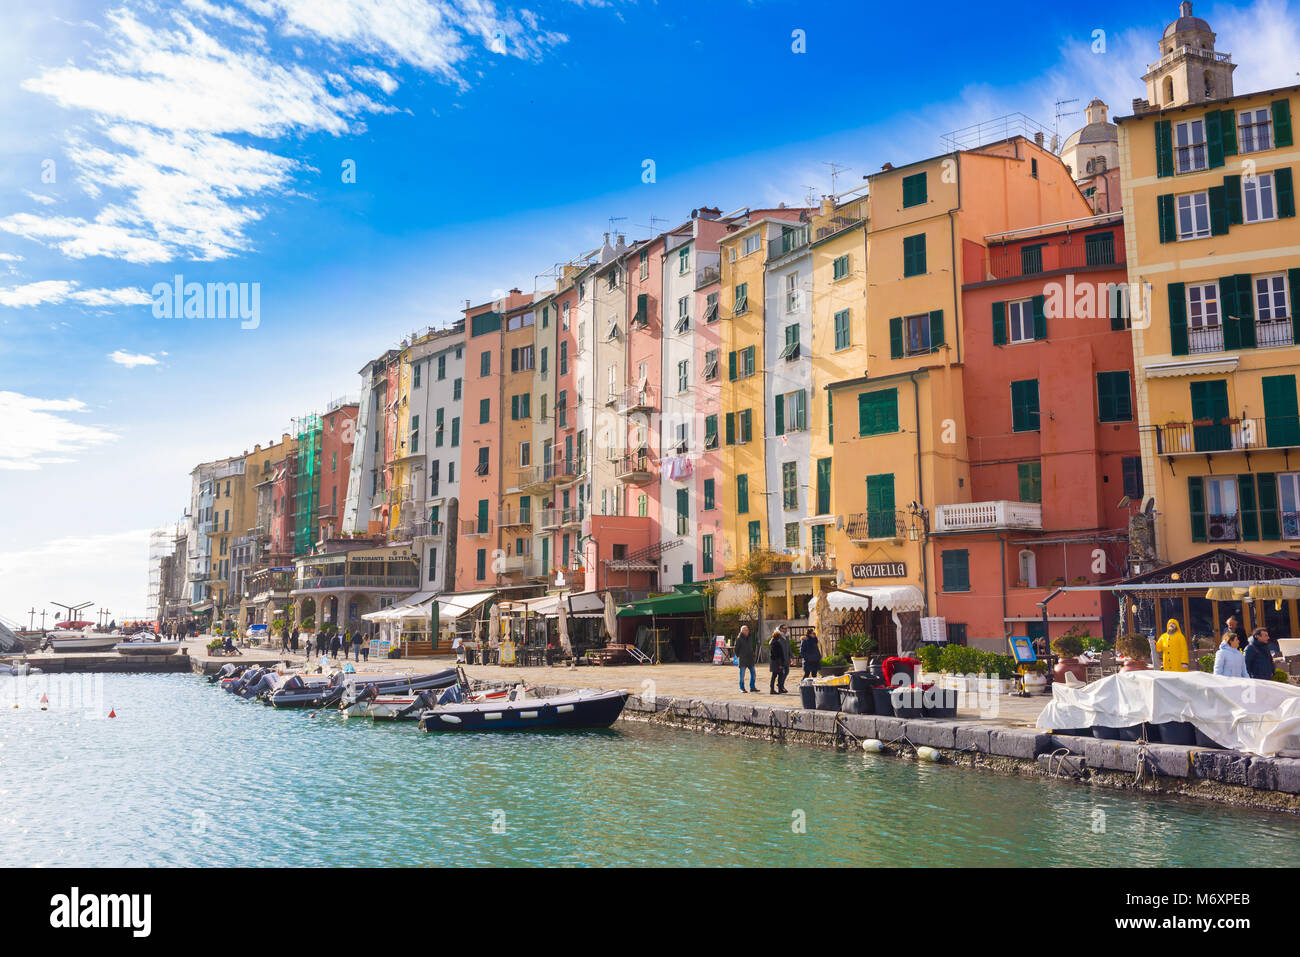 The beautiful town of Porto Venere, also called Portovenere, with characteristic medieval buildings and harbour. Cinque Terre, Liguria, Italy Stock Photo